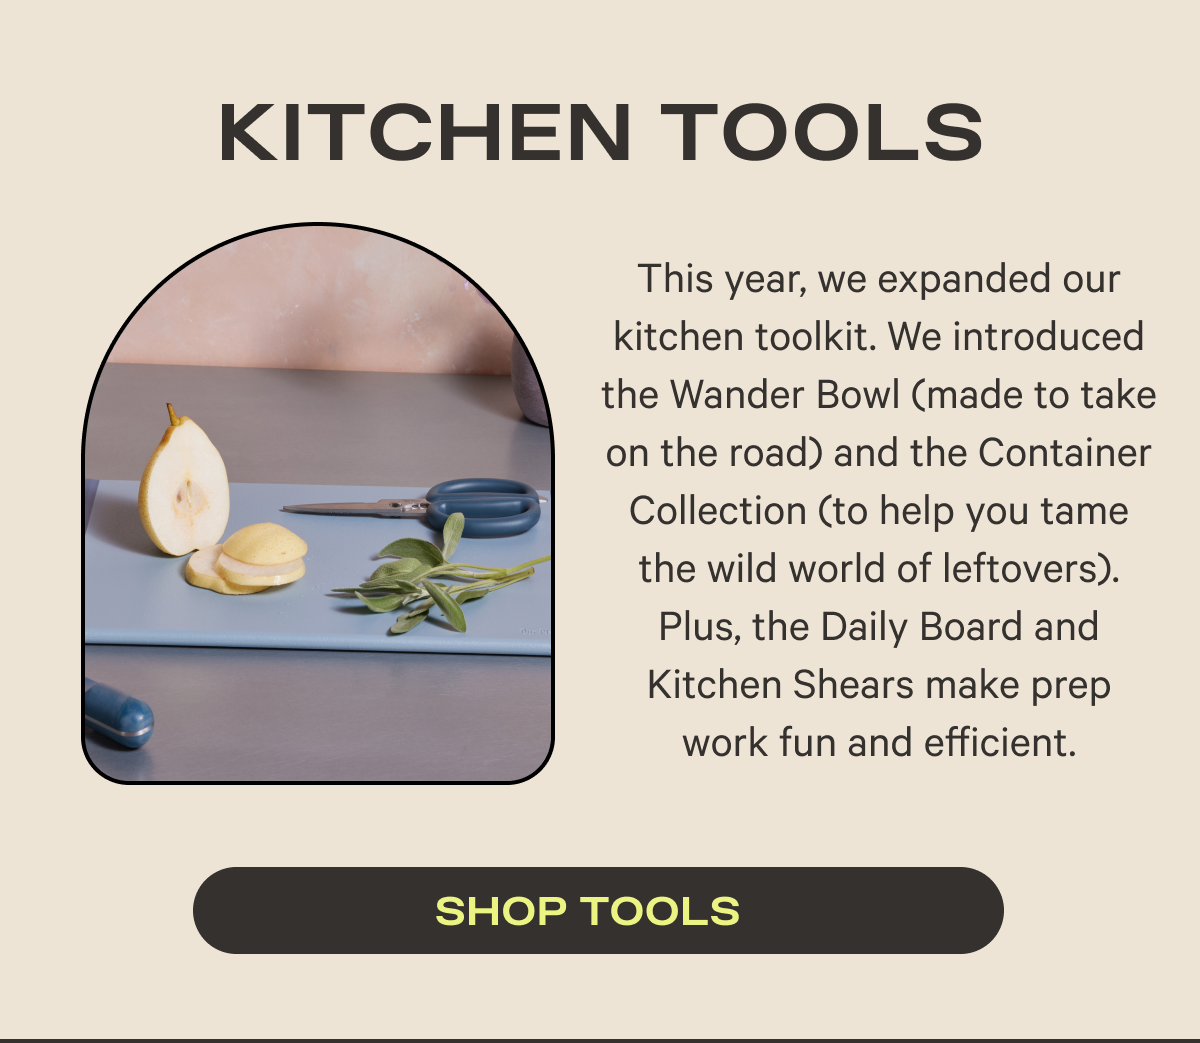 Kitchen Tools | This year, we expanded our kitchen toolkit. We introduced the Wander Bowl (made to take on the road) and the Container Collection (to help you tame the wild world of leftovers). Plus, the Daily Board and Kitchen Shears make prep work fun and efficient.